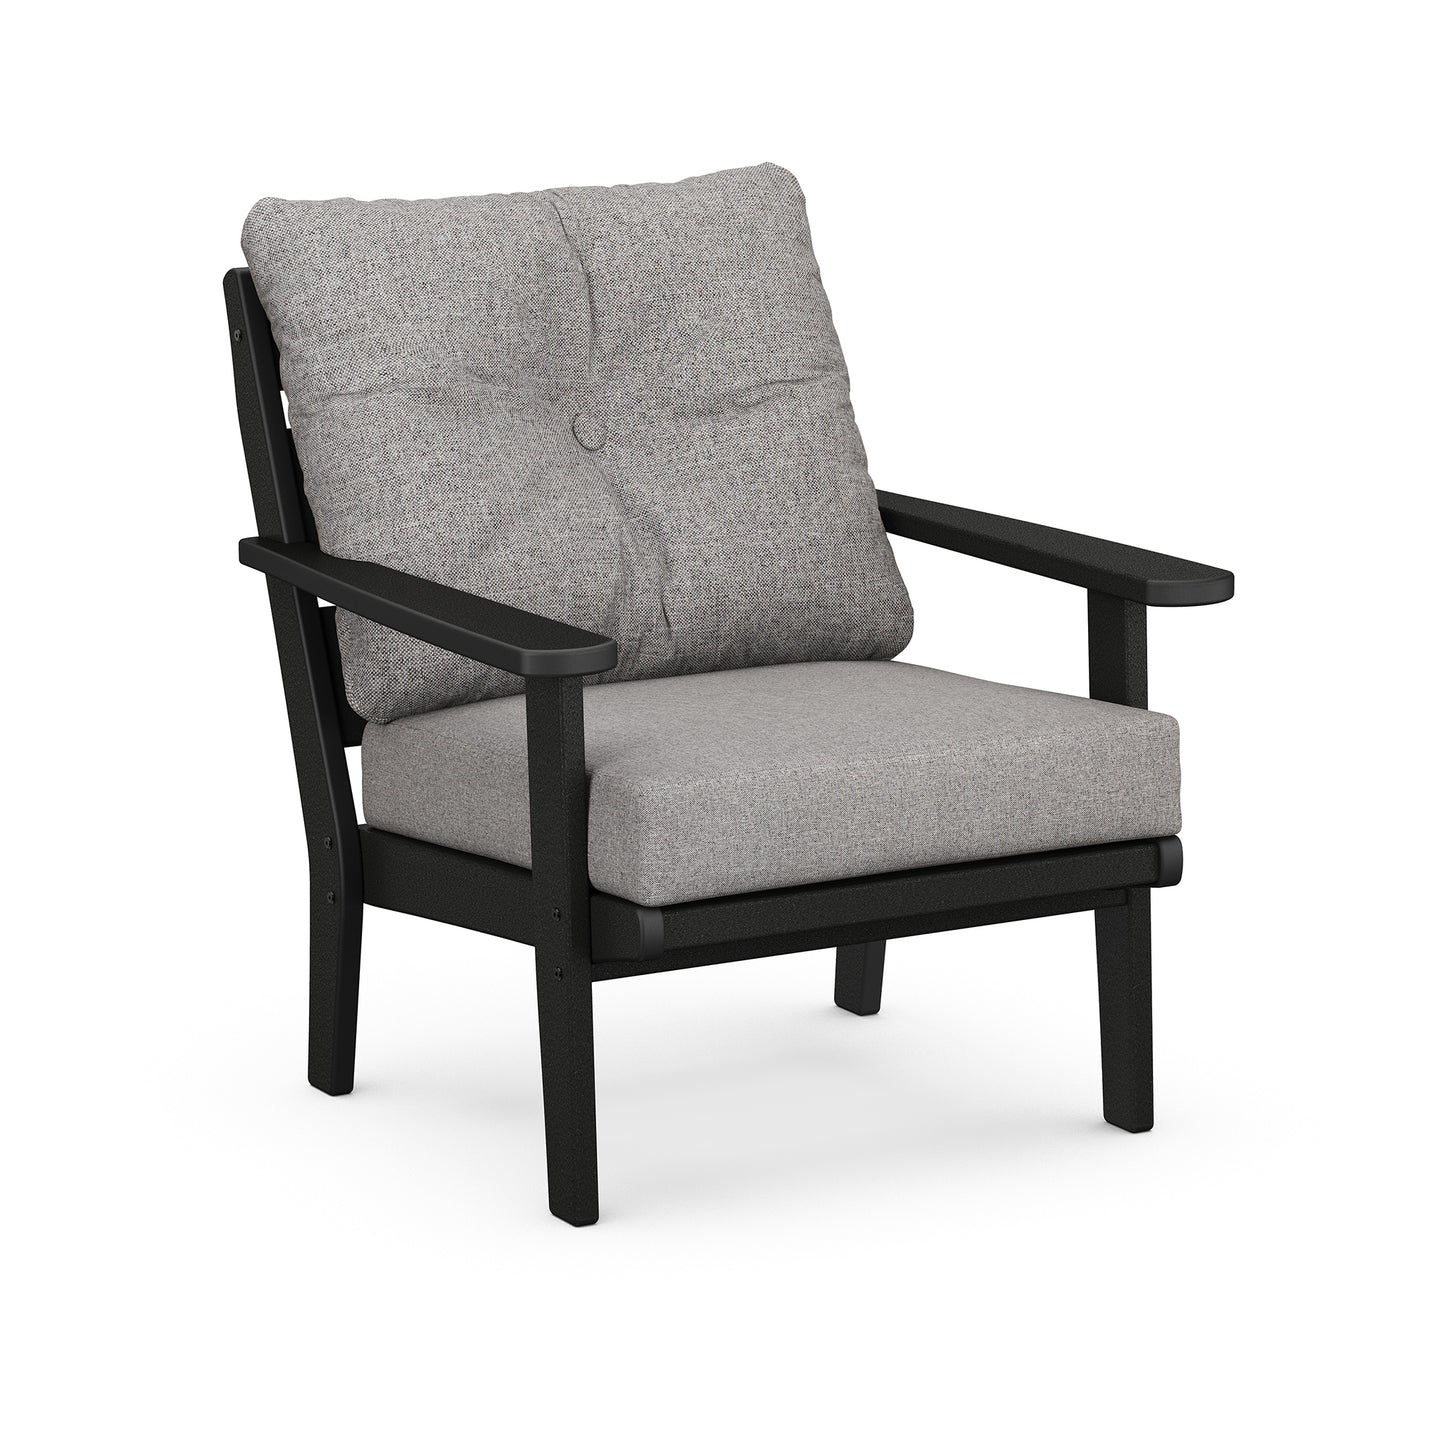 A modern POLYWOOD® Lakeside Deep Seating Chair with black wooden frame and gray cushions, featuring a tufted back pillow, isolated on a white background.